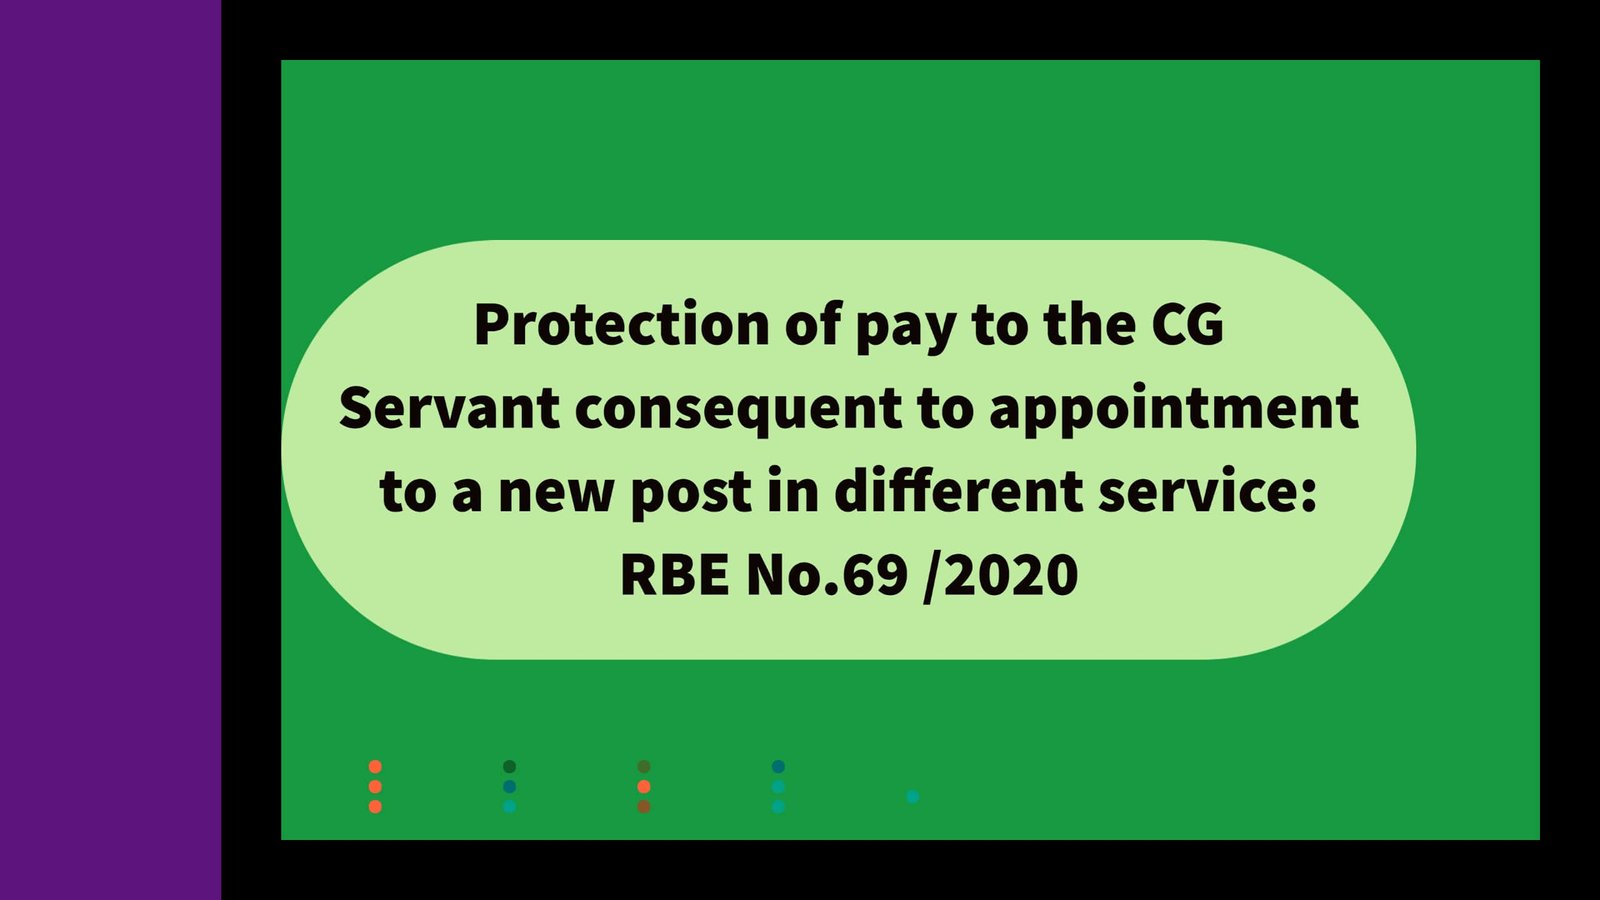 Protection of pay to the CG Servant consequent to appointment to a new post in different service: RBE No.69 /2020